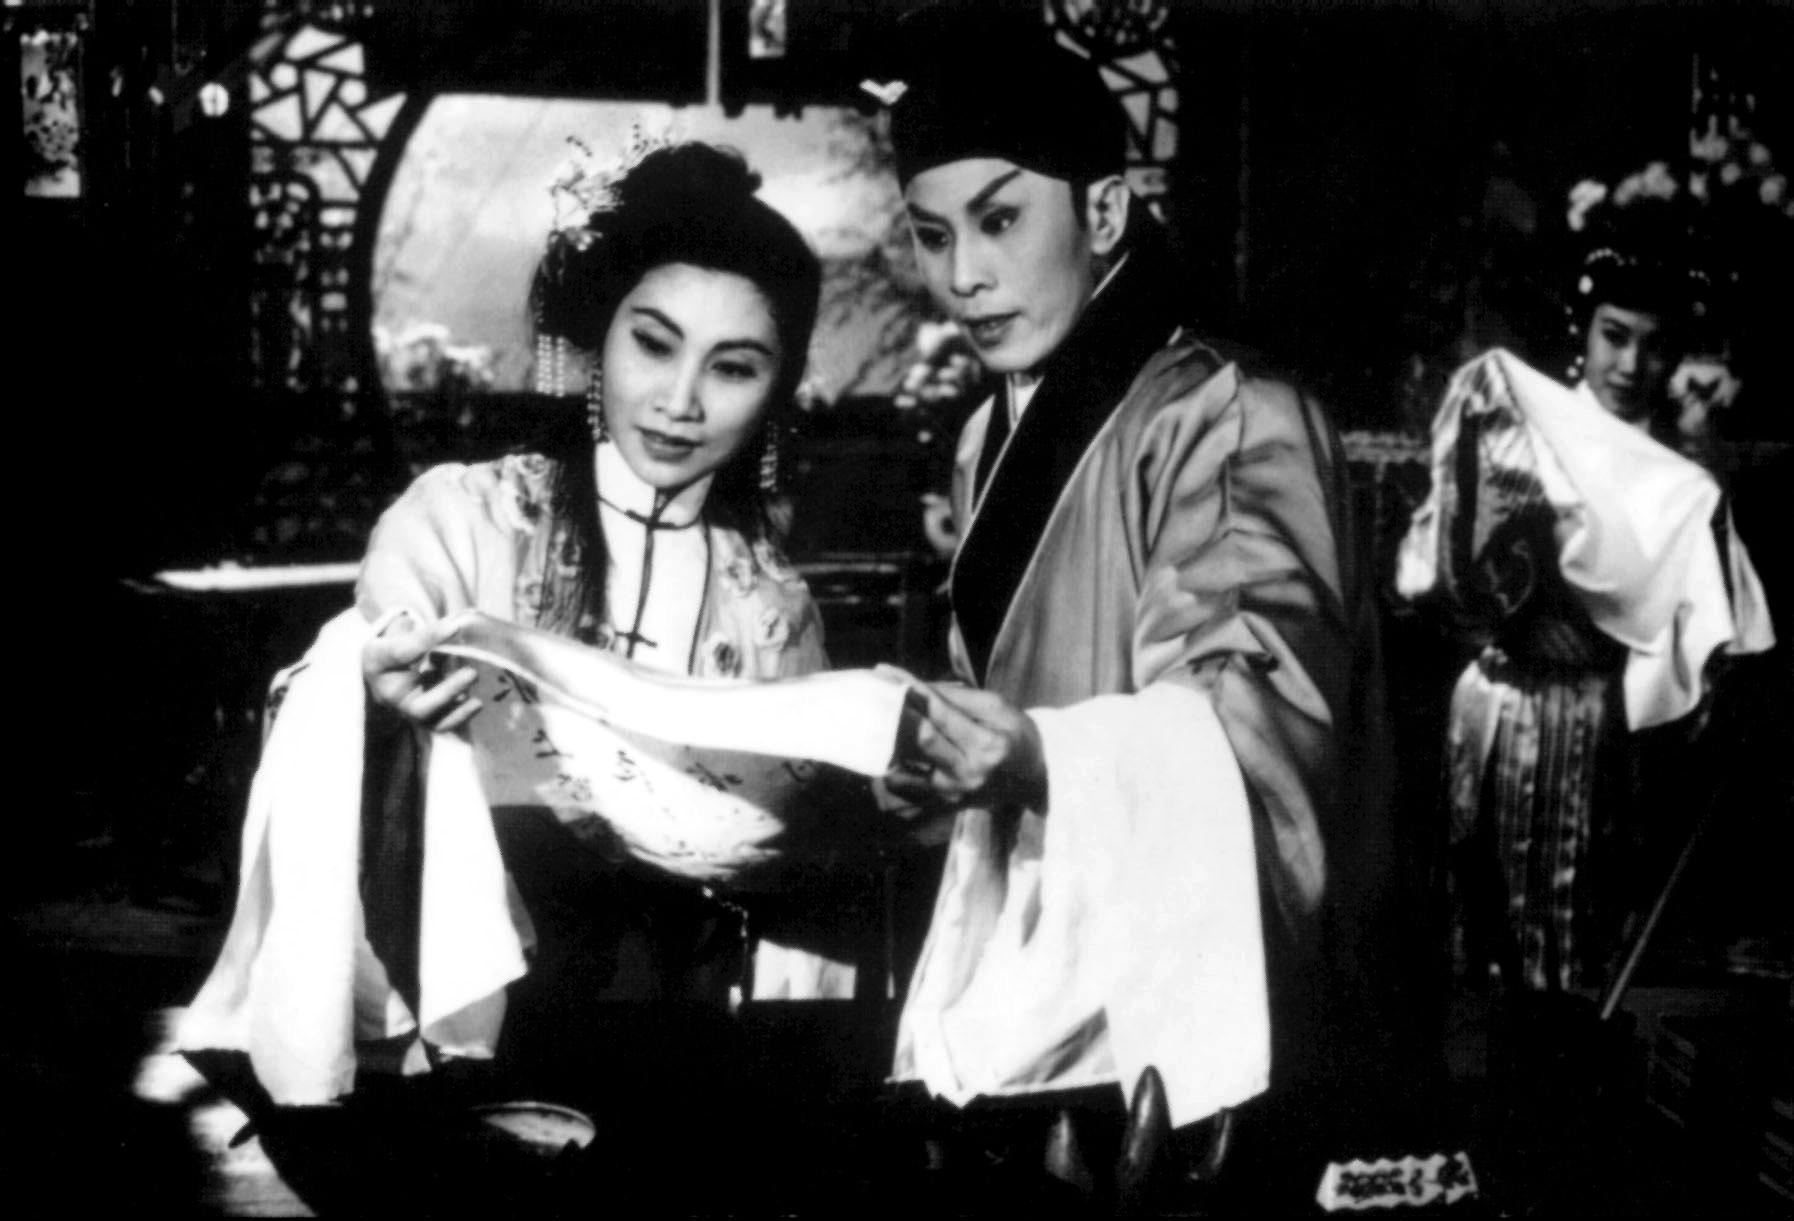 Organised by the Hong Kong Film Archive (HKFA) of the Leisure and Cultural Services Department, the screening programme "Hairpin, Butterfly and Tong Tik-sang Revisited" will feature in July "The Legend of Purple Hairpin" (1959) and "Butterfly and Red Pear Blossom" (1959) (Restored Version) written by master Cantonese opera playwright Tong Tik-sang. The HKFA will introduce additional screenings of the two films on July 1 (Monday) and July 7 (Sunday) at its Cinema so that more audience members can enjoy the Chinese cultural treasure created by Tong. This screening programme is one of the programmes of the Chinese Culture Festival. Photo shows a film still of "The Legend of Purple Hairpin".